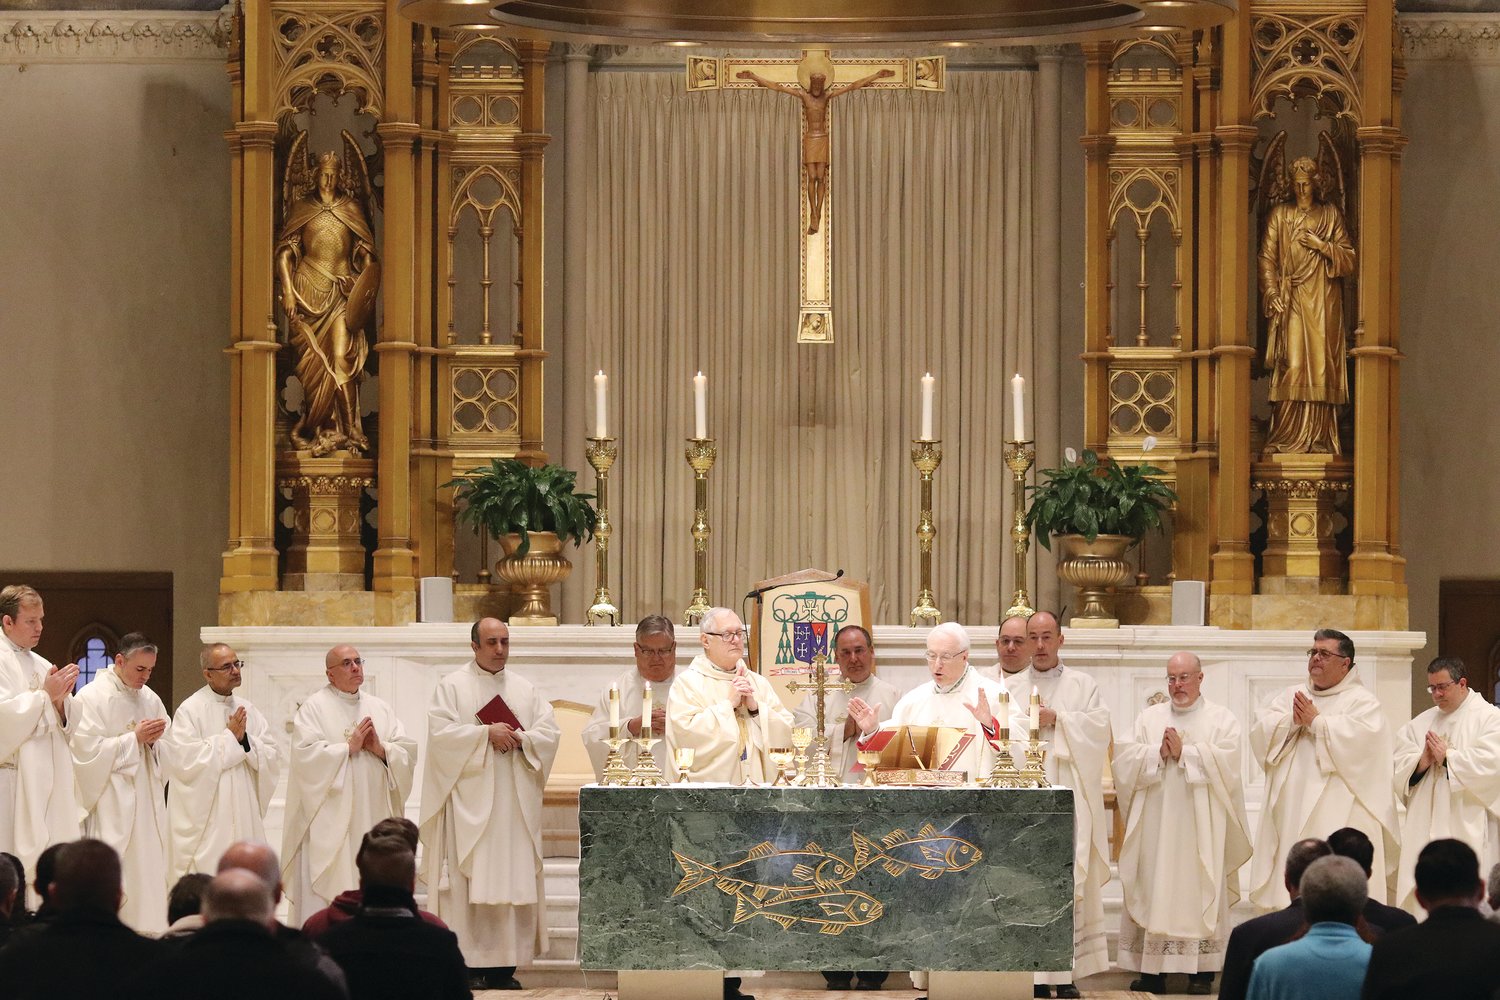 Priests join Bishop Thomas J. Tobin and Auxiliary Bishop Robert C. Evans in celebrating Mass marking the 150th Anniversary of the founding of the Diocese of Providence at the Cathedral of SS. Peter and Paul on Feb. 16.